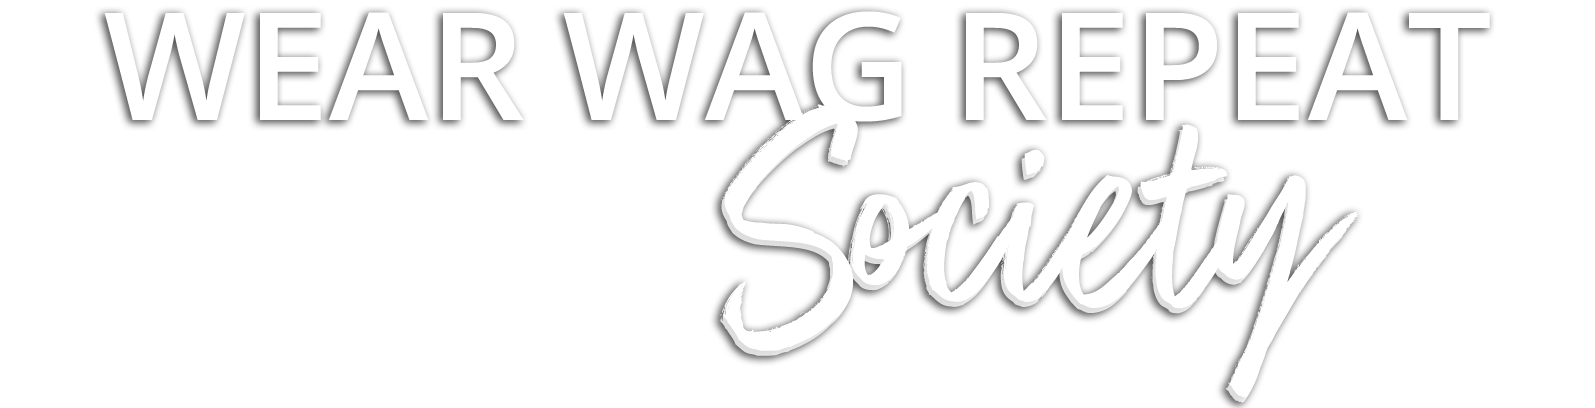 Wear Wag Repeat Society membership for women in the pet industry